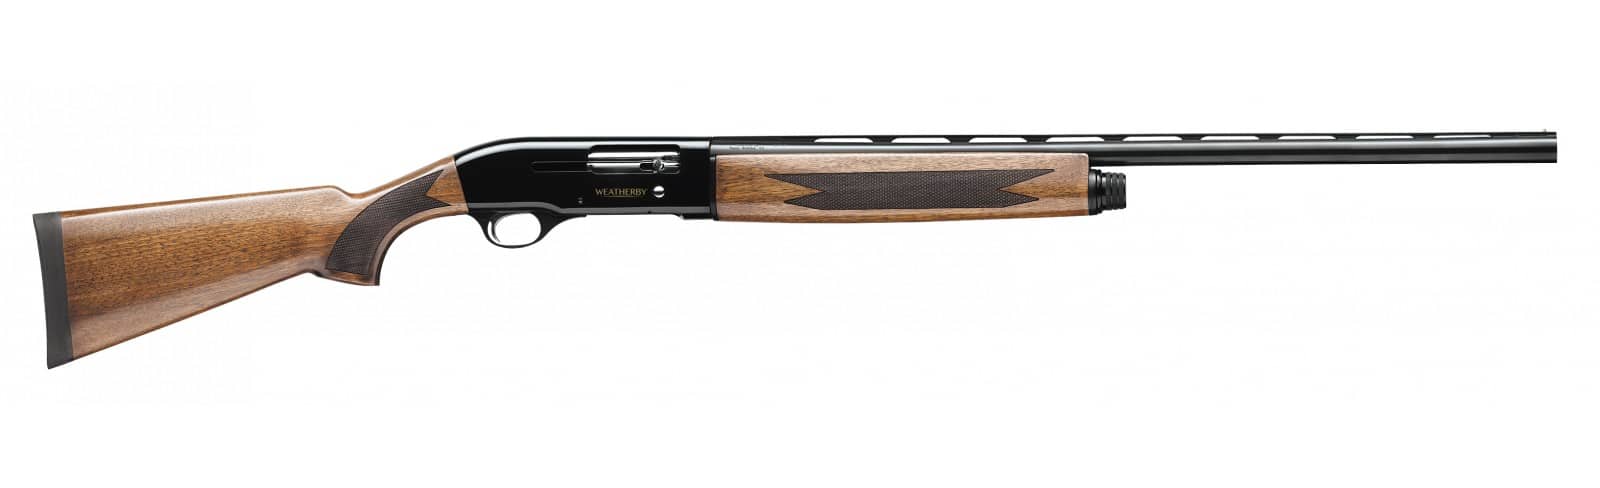 image of the Weatherby SA-08 Deluxe